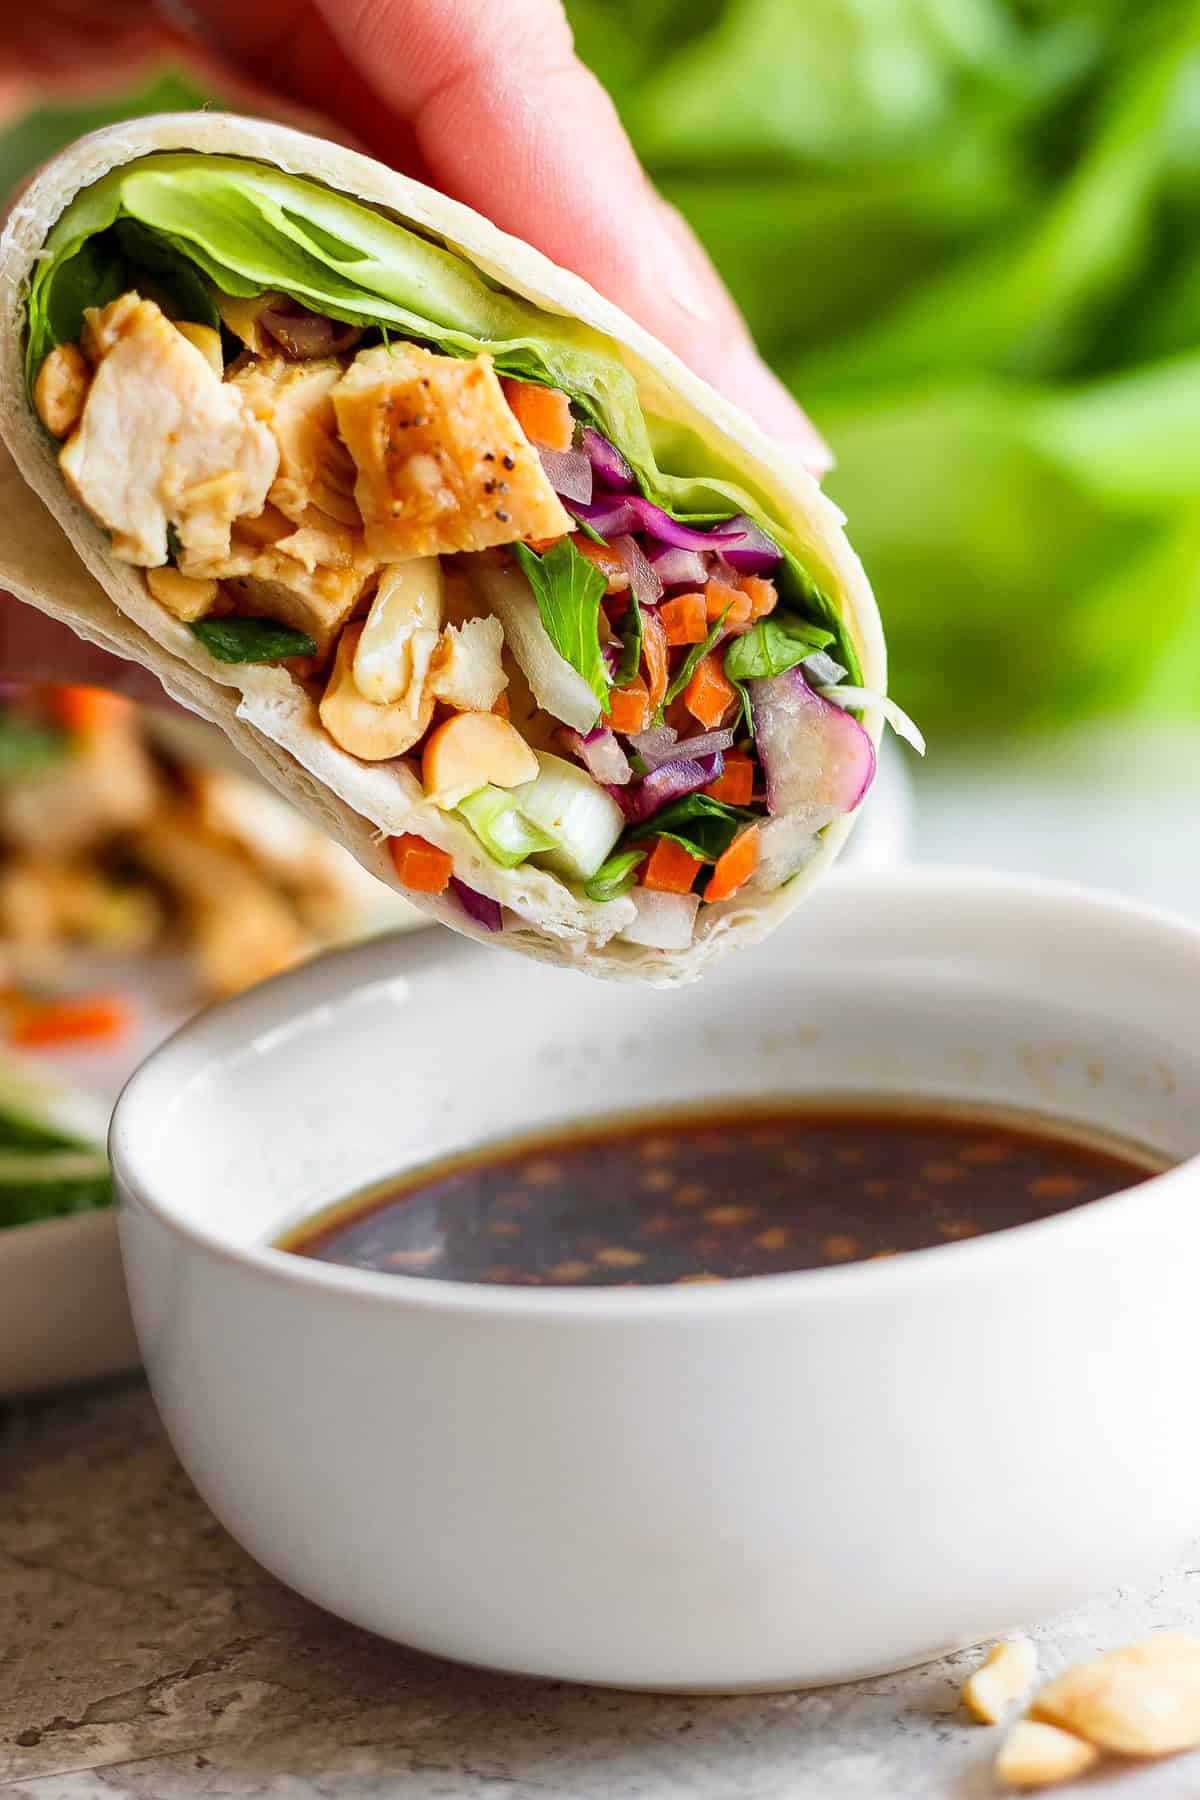 A hand holding a fresh spring roll filled with chicken, vegetables, and cashews, next to a bowl of dipping sauce.